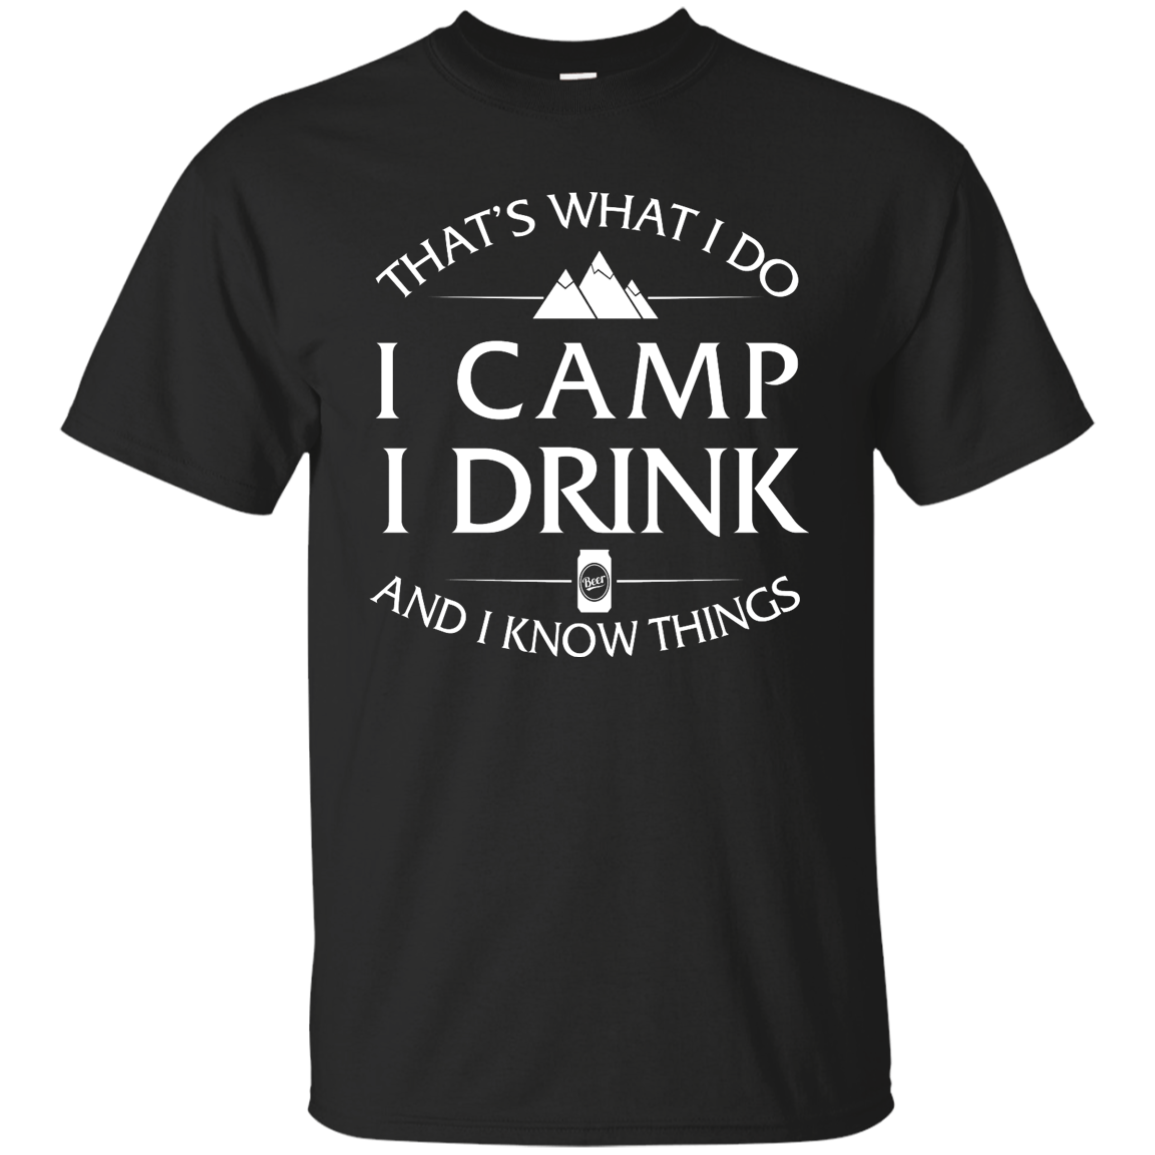 I Camp, I Drink and I know things Shirt, Hoodie, Tank